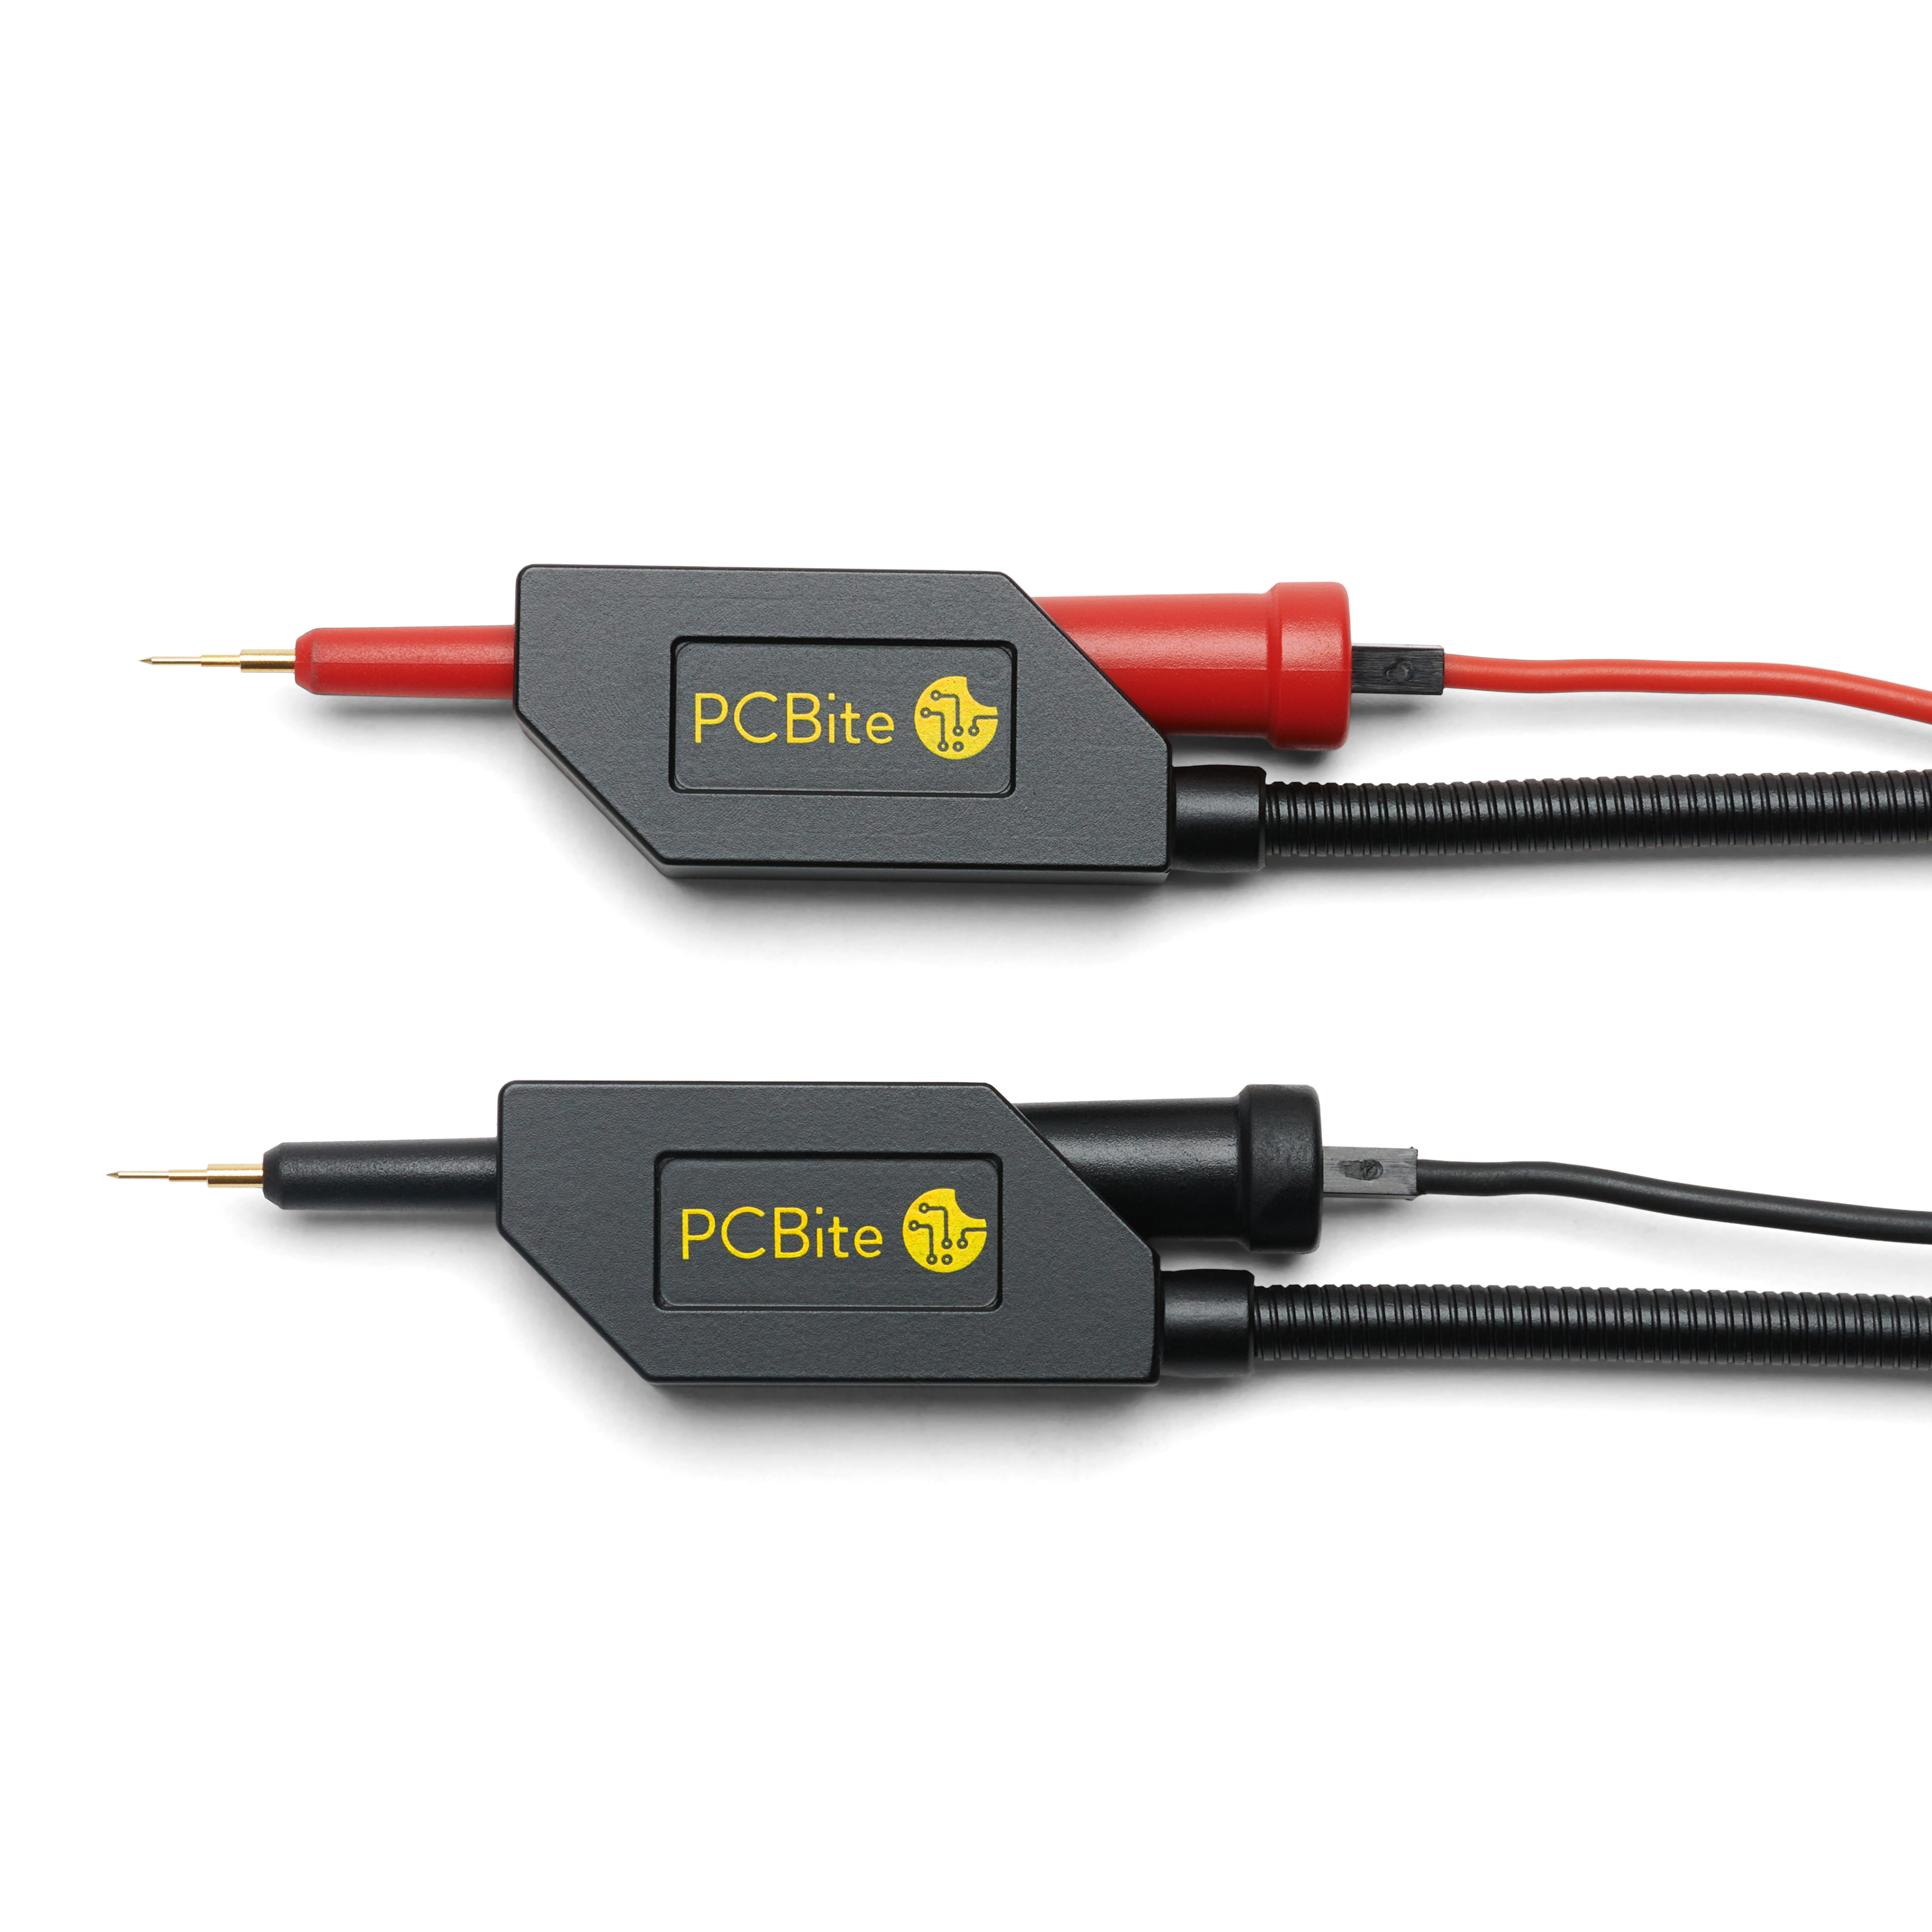 PCBite kit with 2x SQ10 probes for DMM @ electrokit